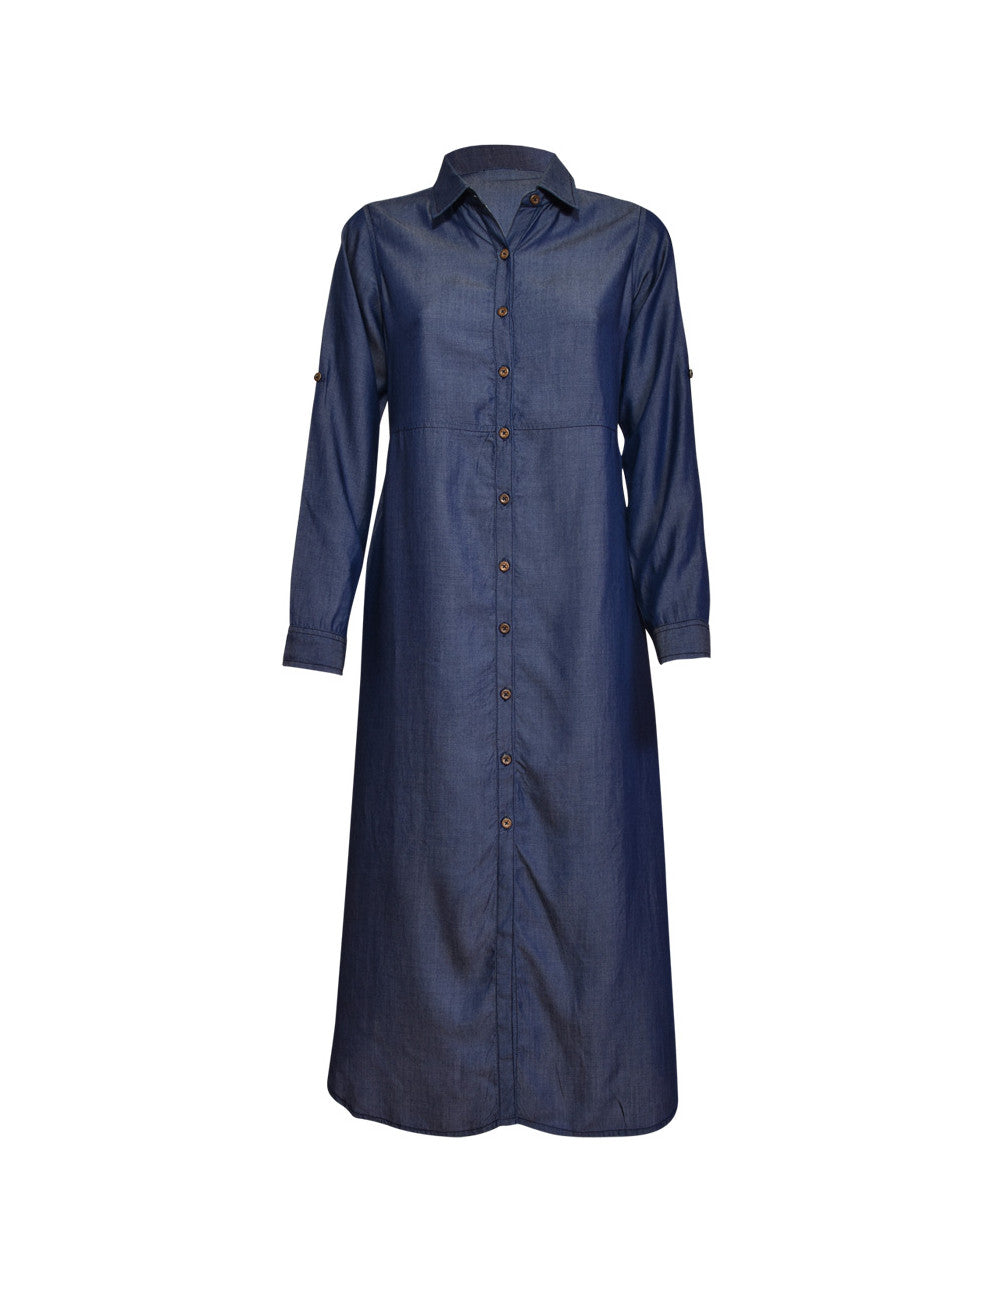 Long denim shirtdress by Verdissima Italy made of tencel fabric, lightweight and breathable. 